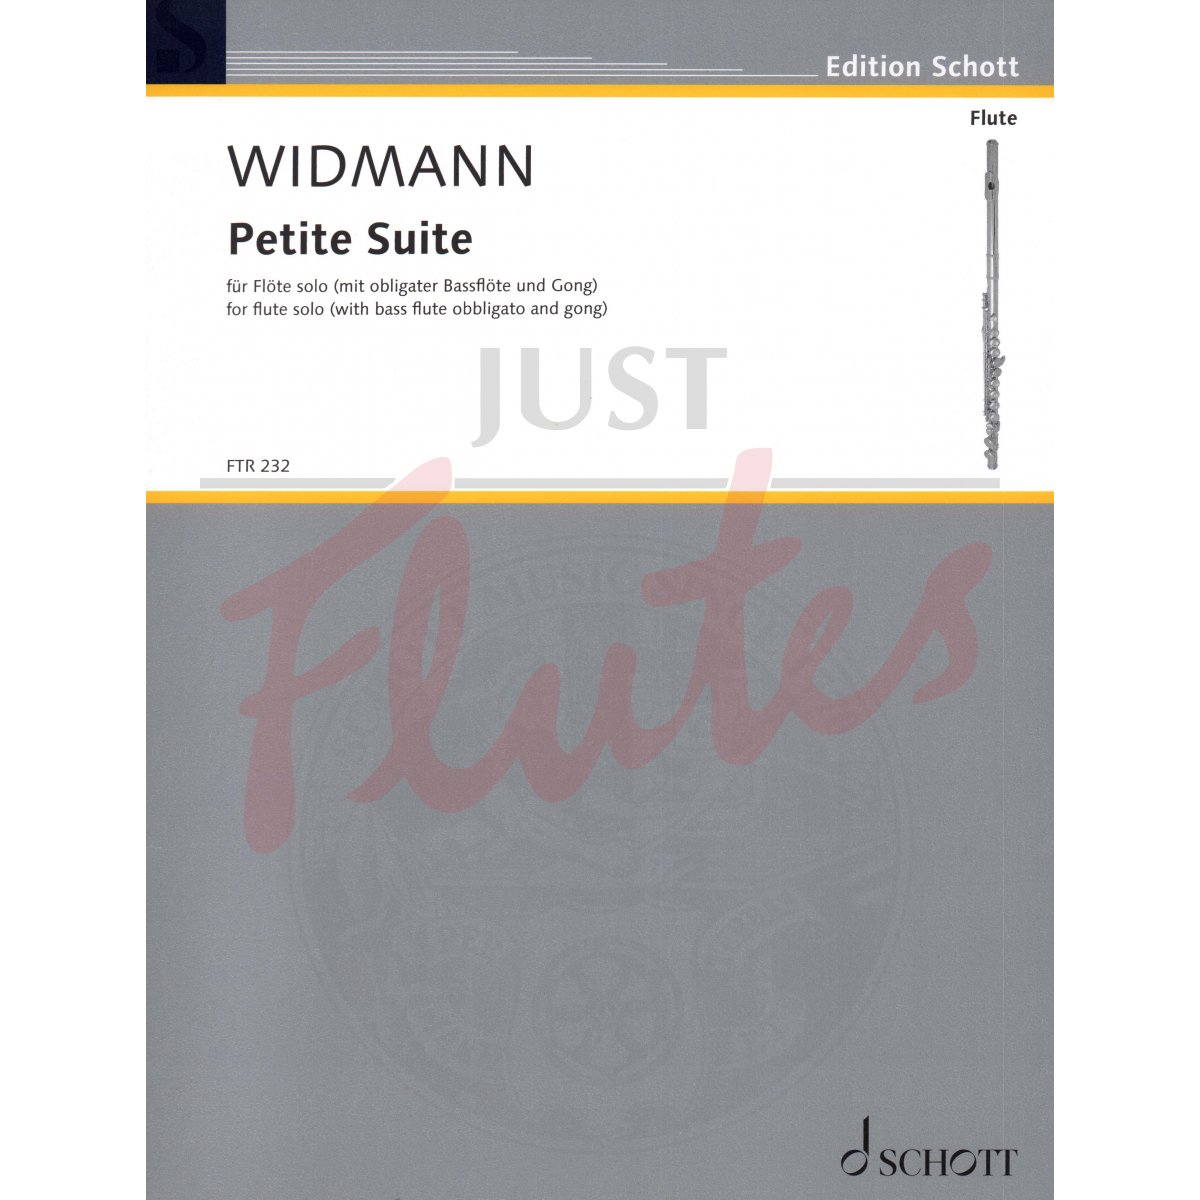 Petite Suite for Flute (with Bass Flute Obbligato and Gong)